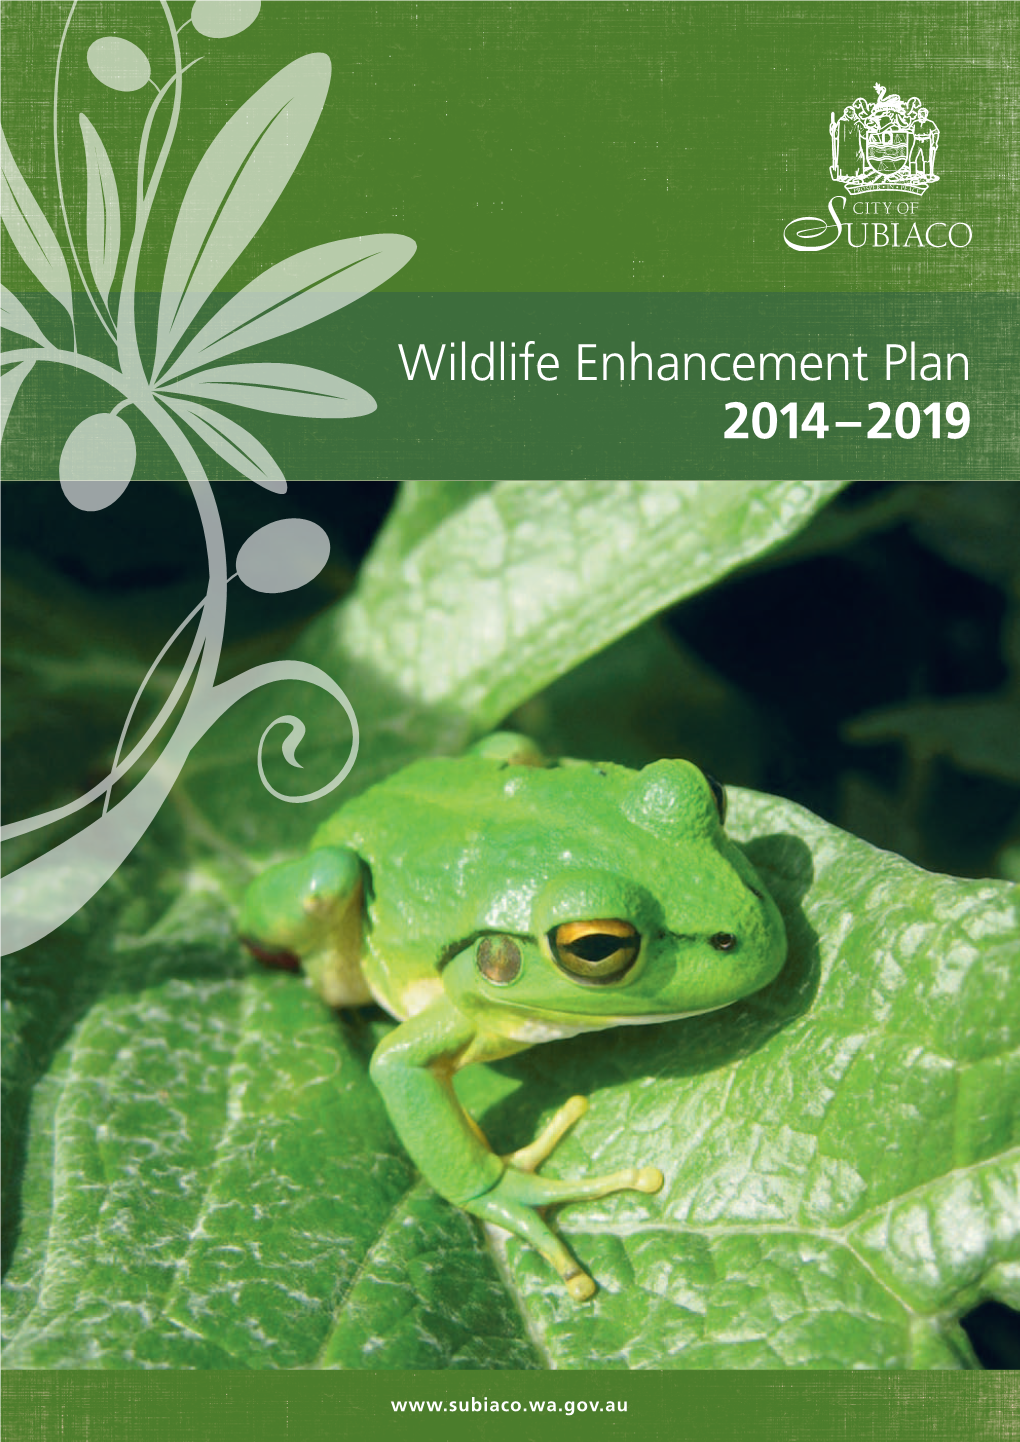 Wildlife Enhancement Plan 2014–2019 Aims to Support Increased Biodiversity and the Conservation of Native Fauna and Fauna Habitat Within the Local Environment